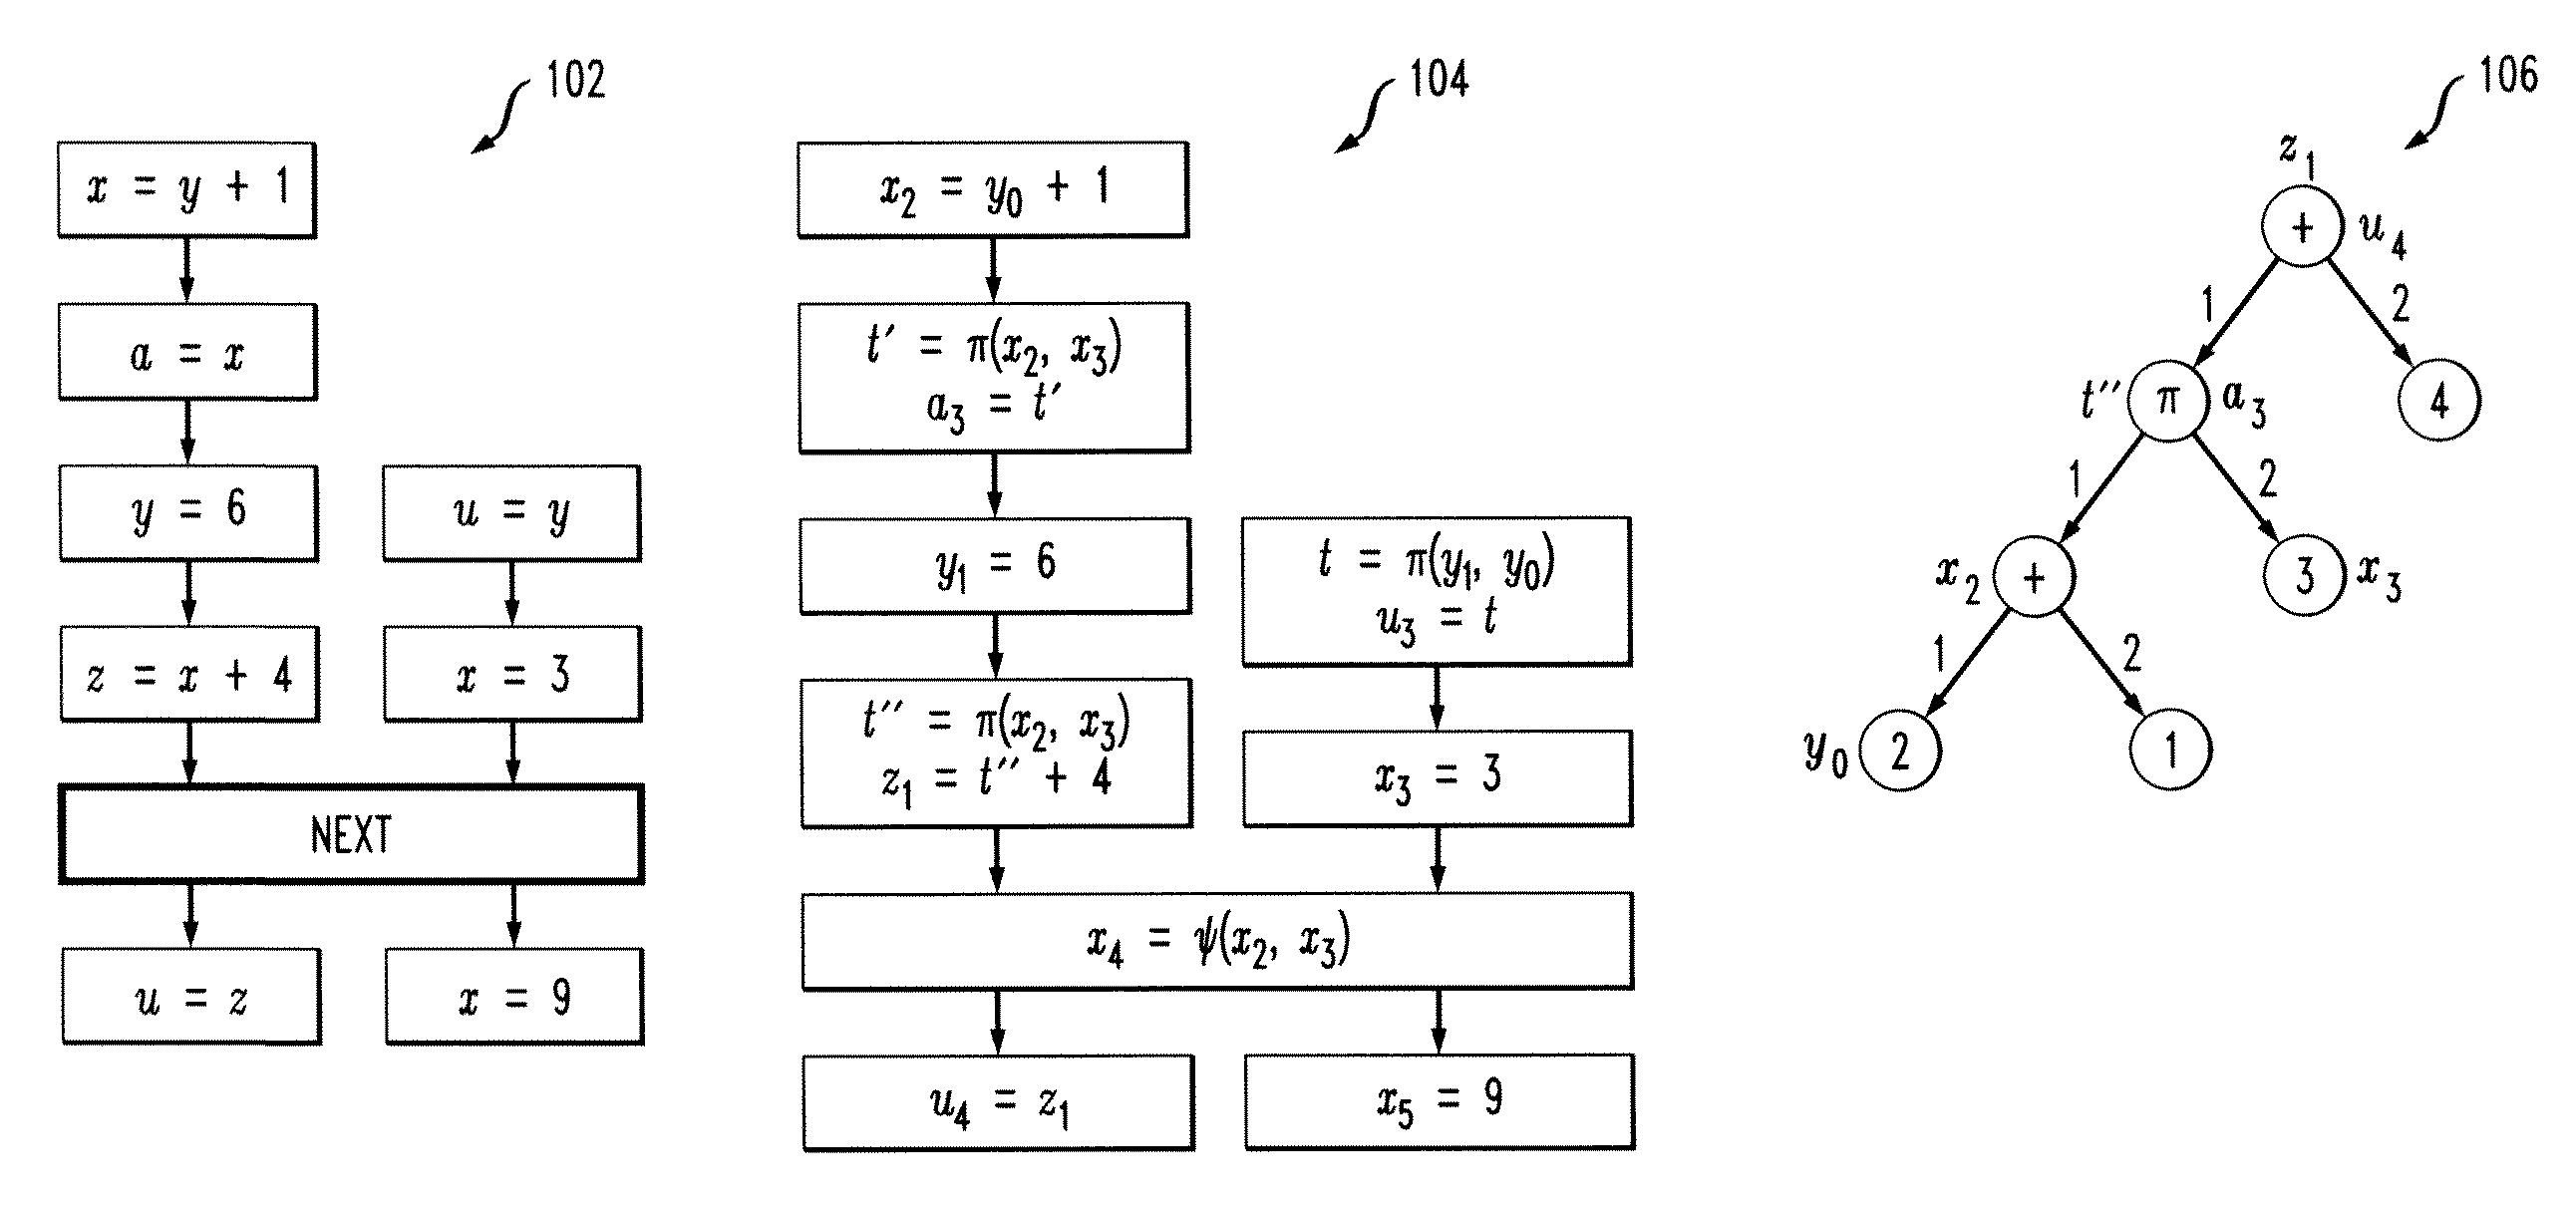 Concurrent static single assignment for general barrier synchronized parallel programs